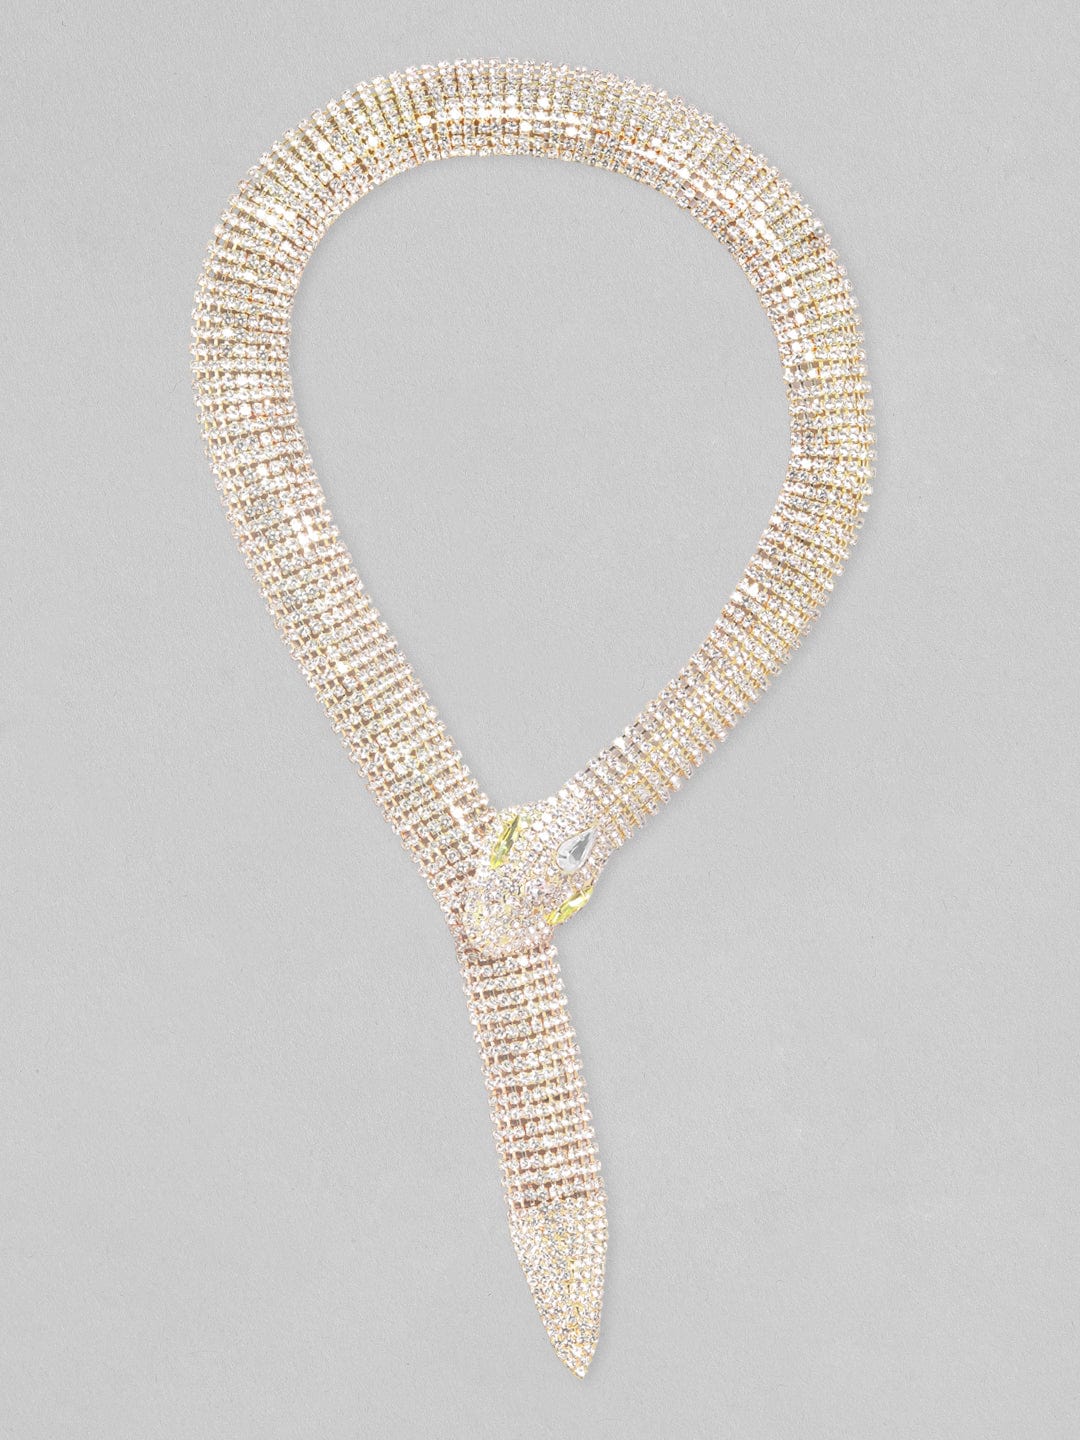 Shop Rubans Voguish Gold Toned Link Style Serpent Chain With Zircon Stones Studded. Online at Rubans